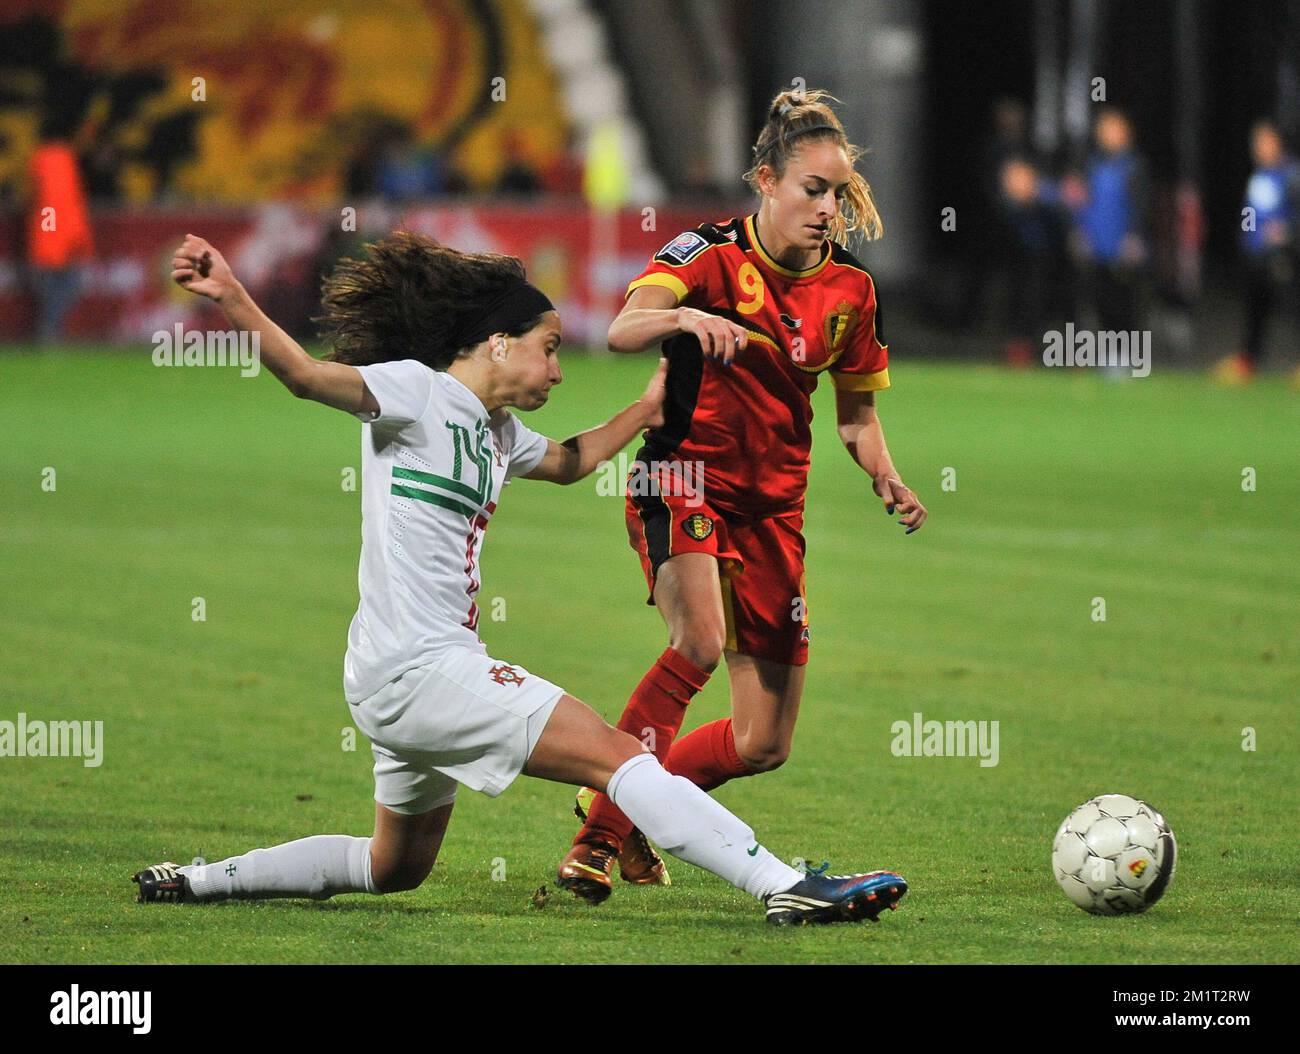 20131031 - ANTWERPEN , BELGIUM : Belgian Tessa Wullaert (right) pictured avoiding the tackle from Portugese Dolores Silva (14) during the female soccer match between Belgium and Portugal , on the fourth matchday in group 5 of the UEFA qualifying round to the FIFA Women World Cup in Canada 2015 at Het Kiel stadium , Antwerp . Thursday 31st October 2013. PHOTO DAVID CATRY Stock Photo